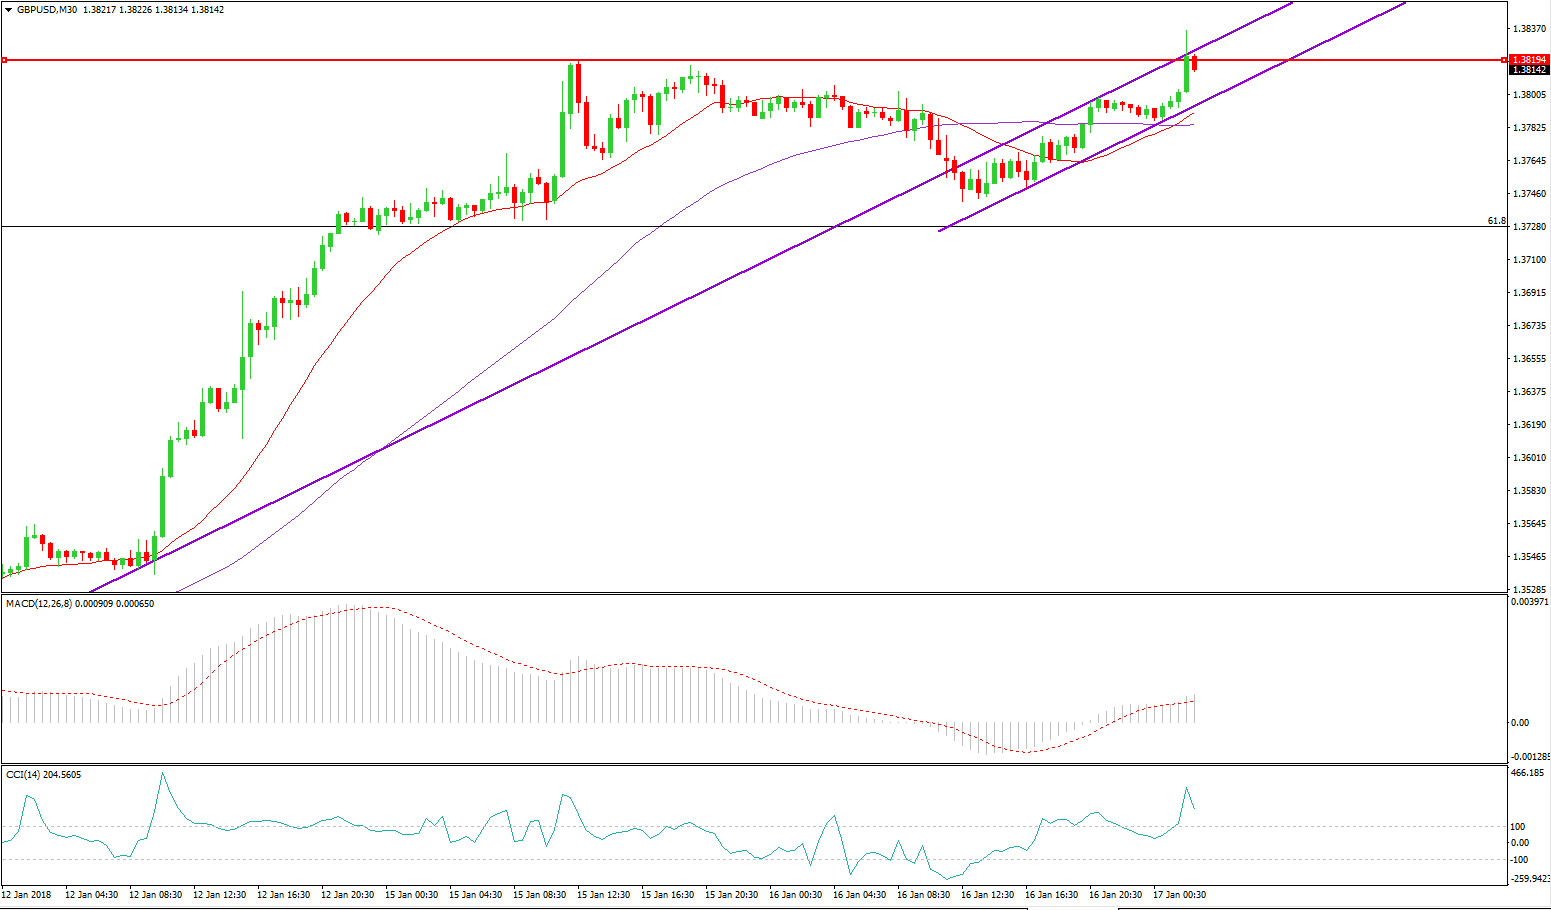 GBP Facing a Resistance on 30-minute Chart